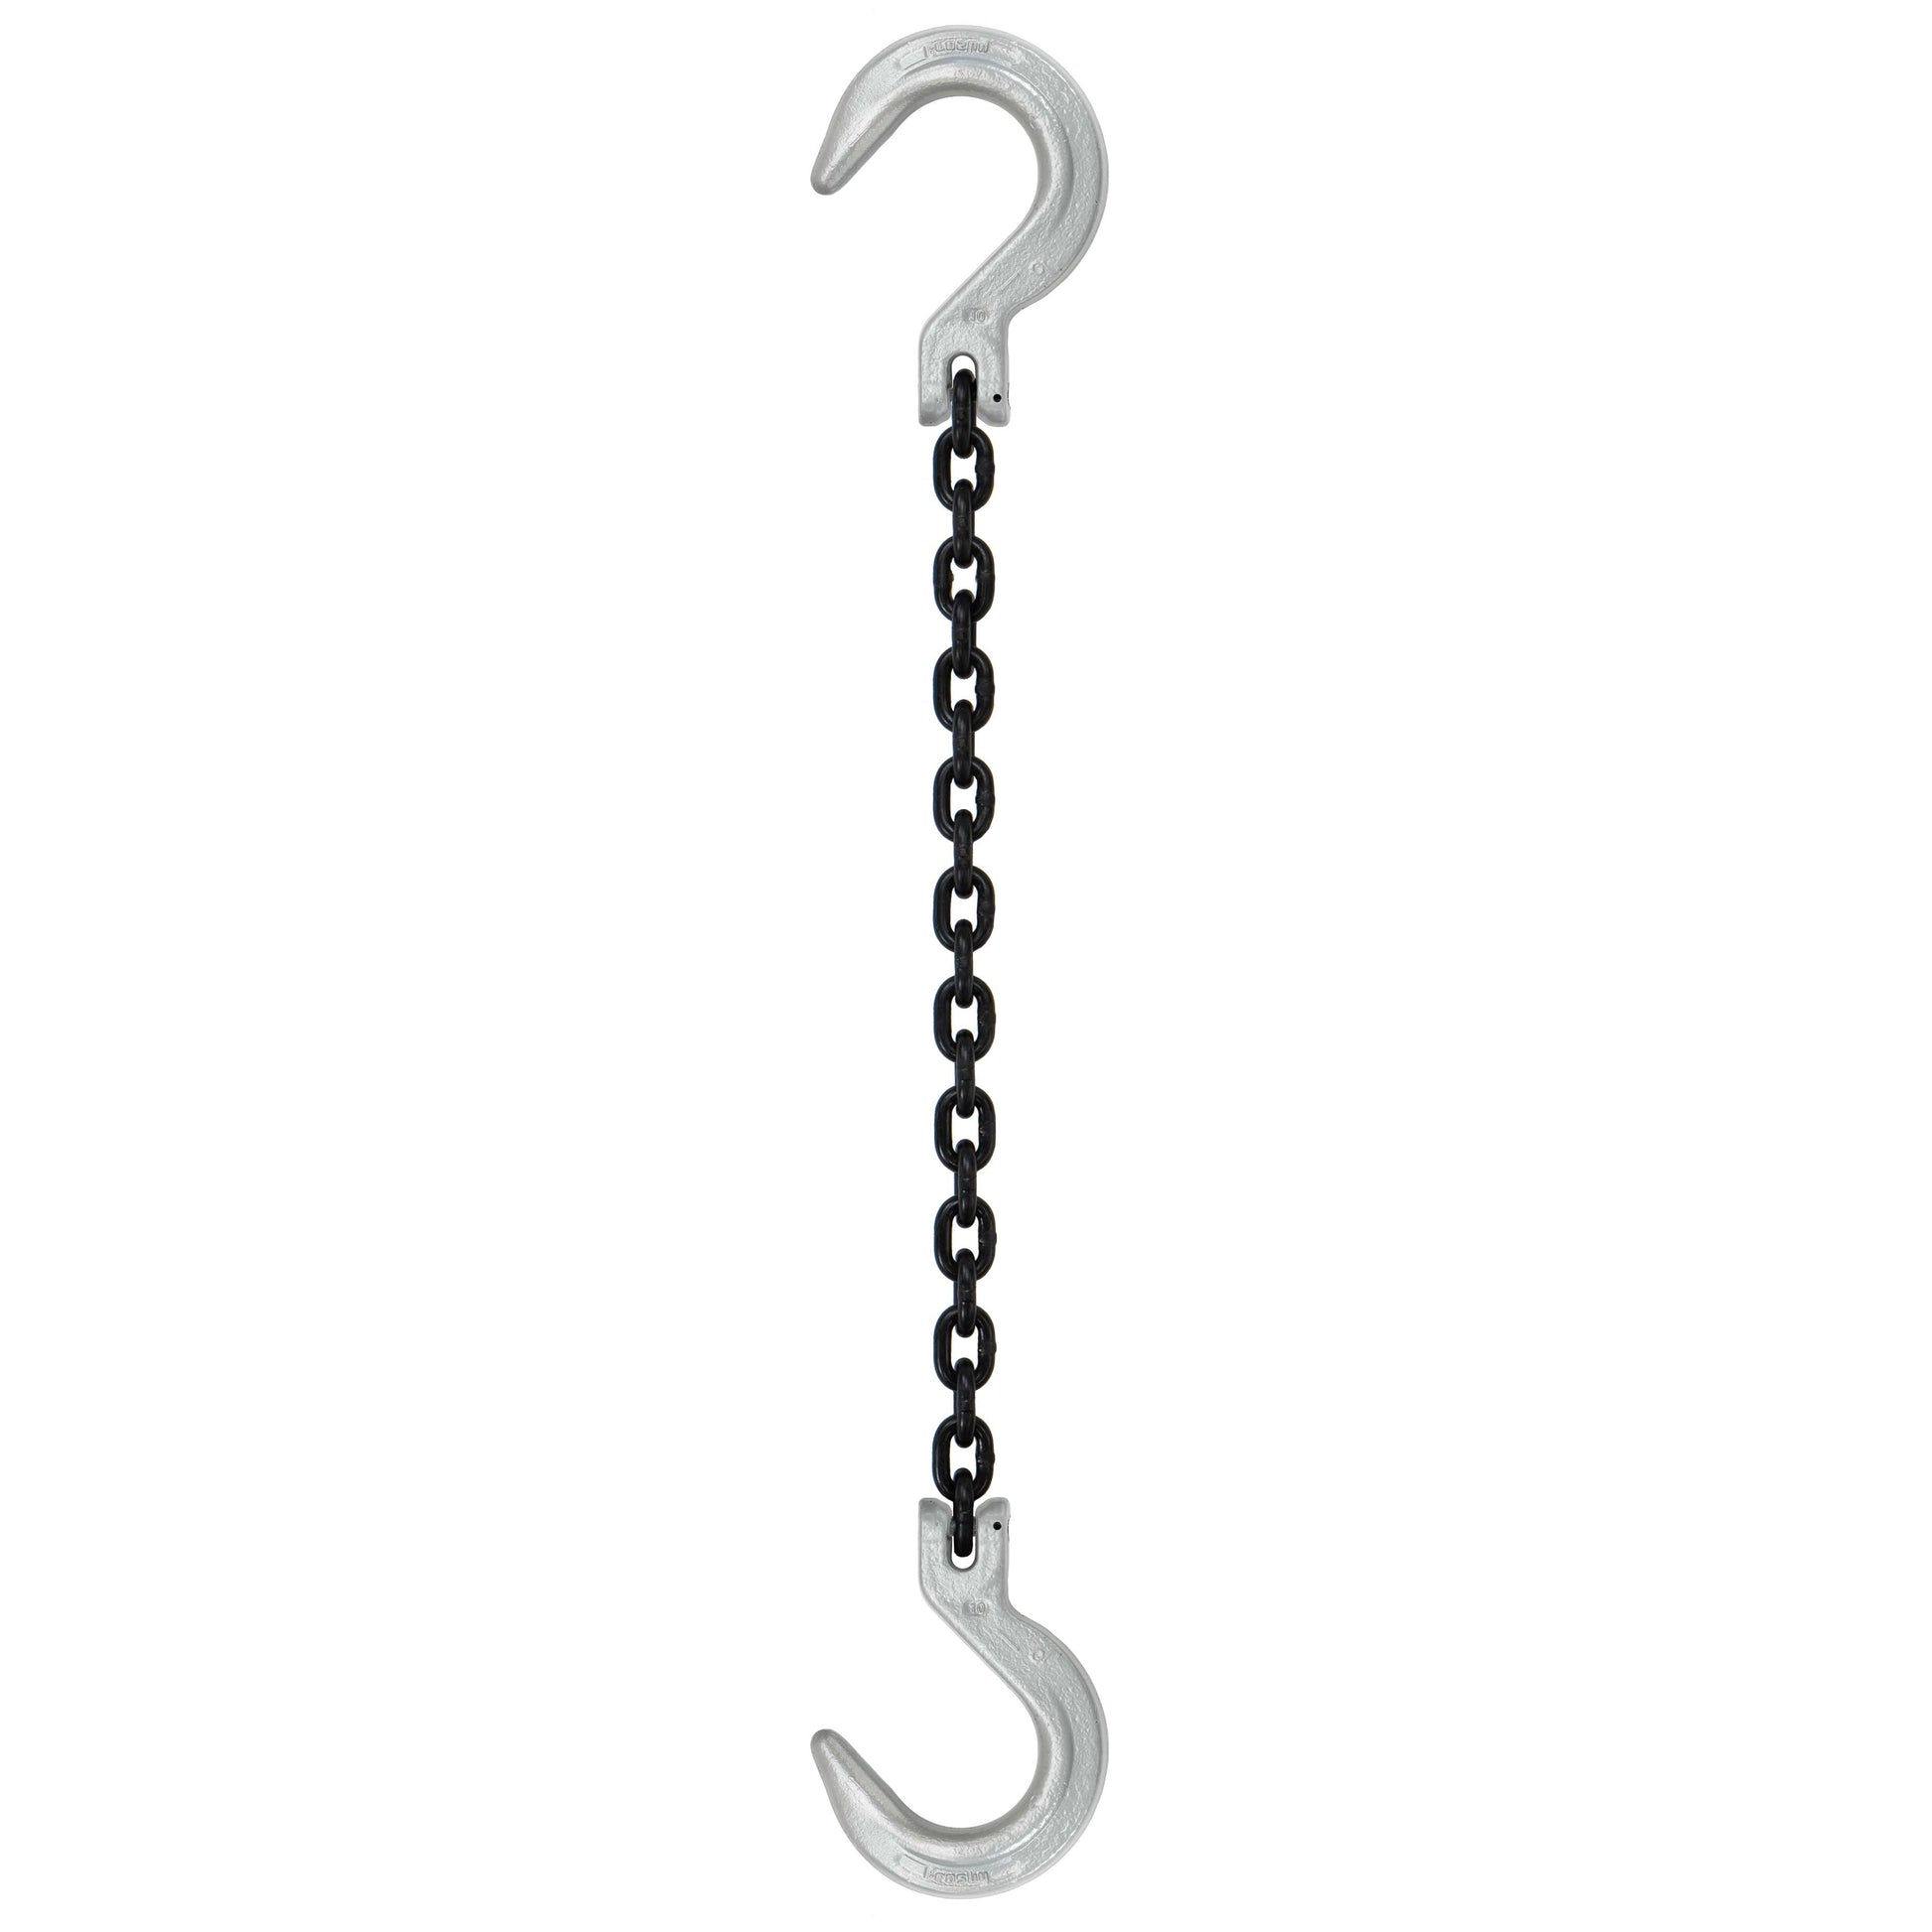 516 inch x 18 foot Domestic Single Leg Chain Sling w Crosby Foundry & Foundry Hooks Grade 100 image 1 of 2